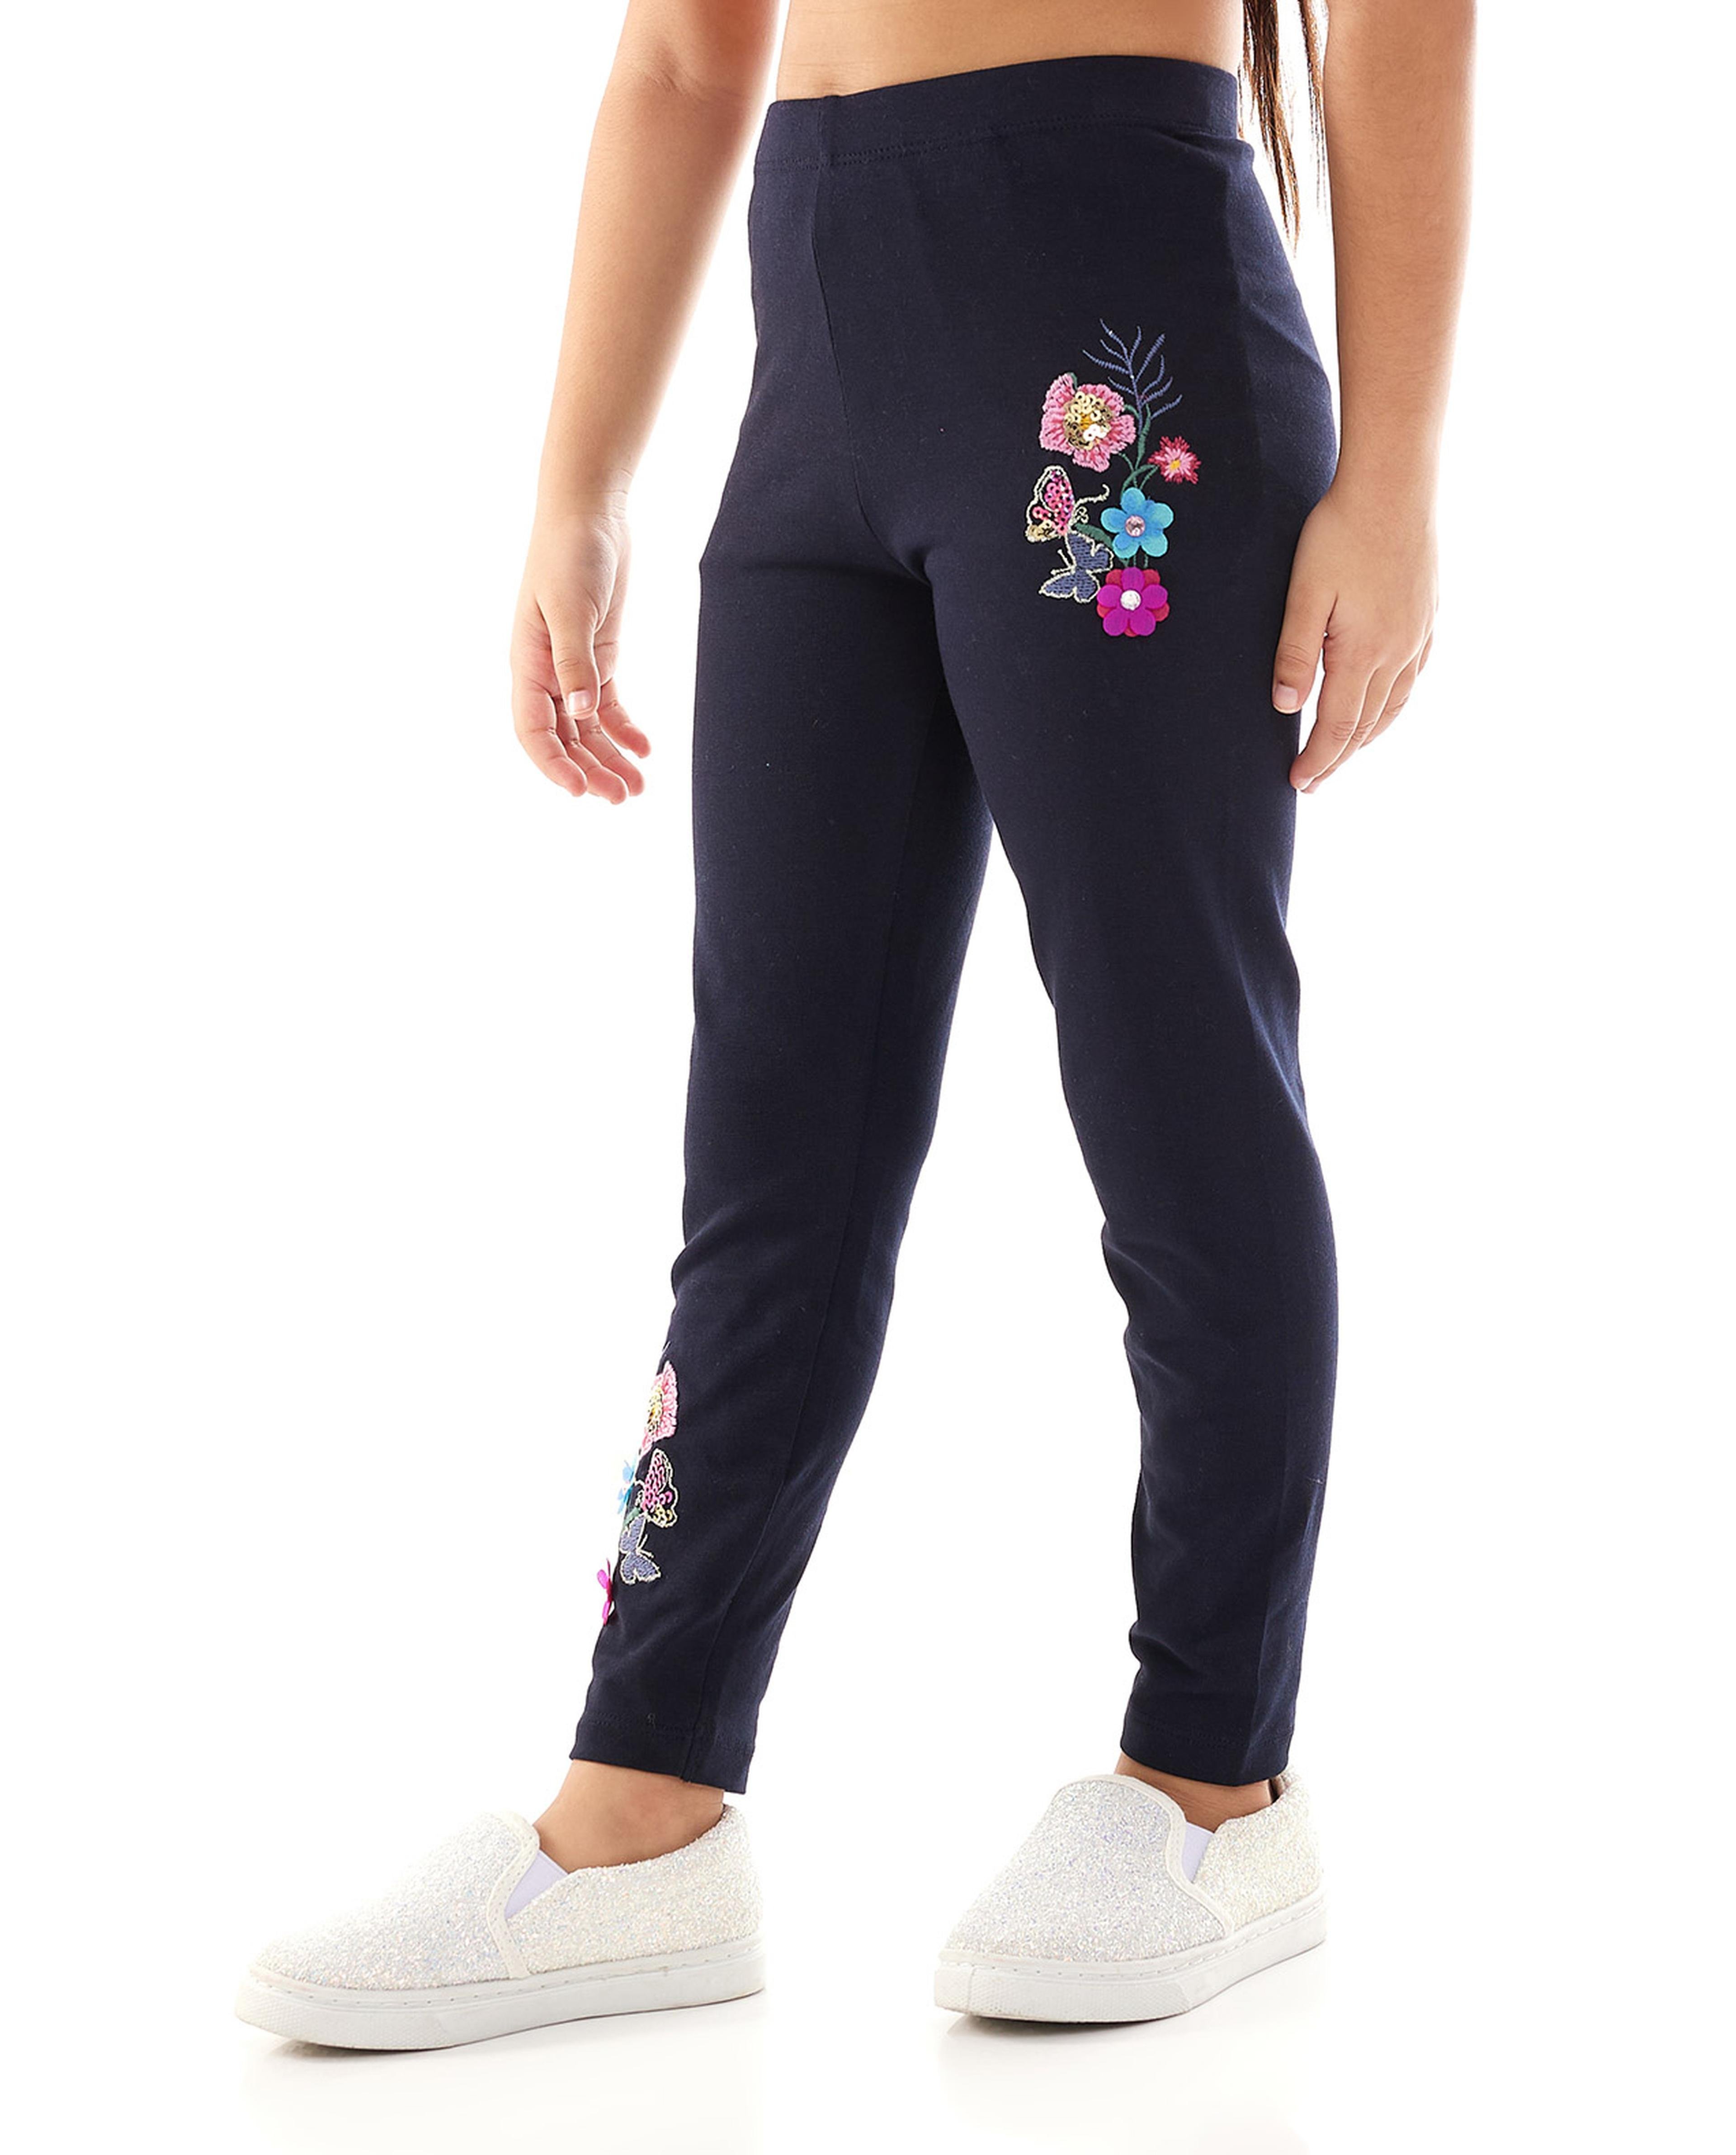 Embroidered Leggings with Elastic Waist